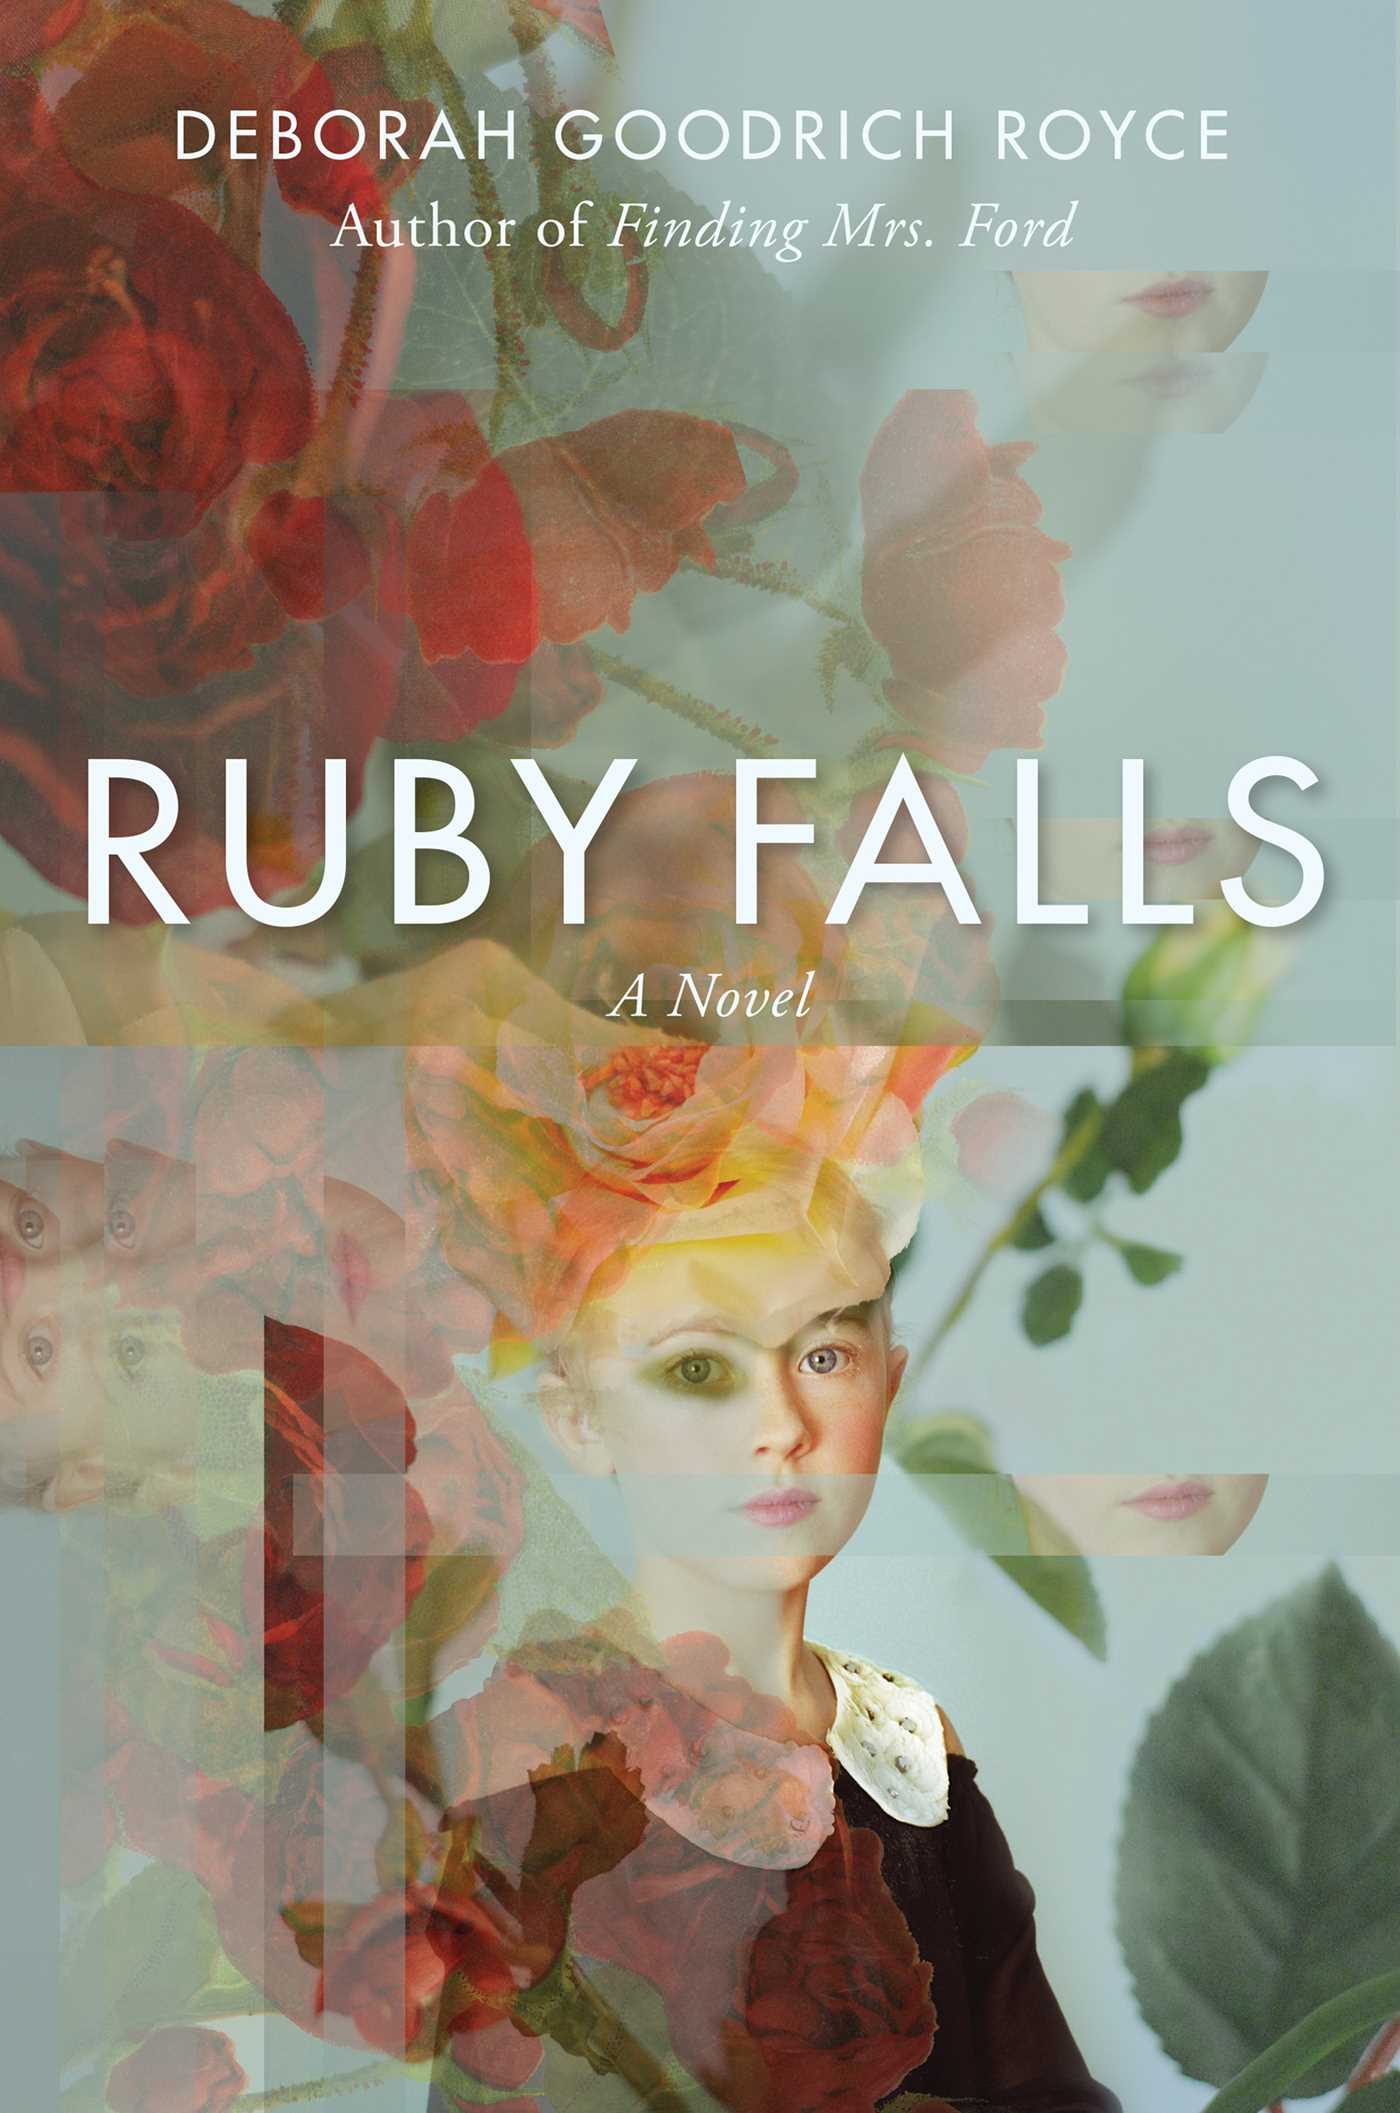 When Will Ruby Falls By Deborah Goodrich Royce Come Out? 2021 Psychological Thriller Releases